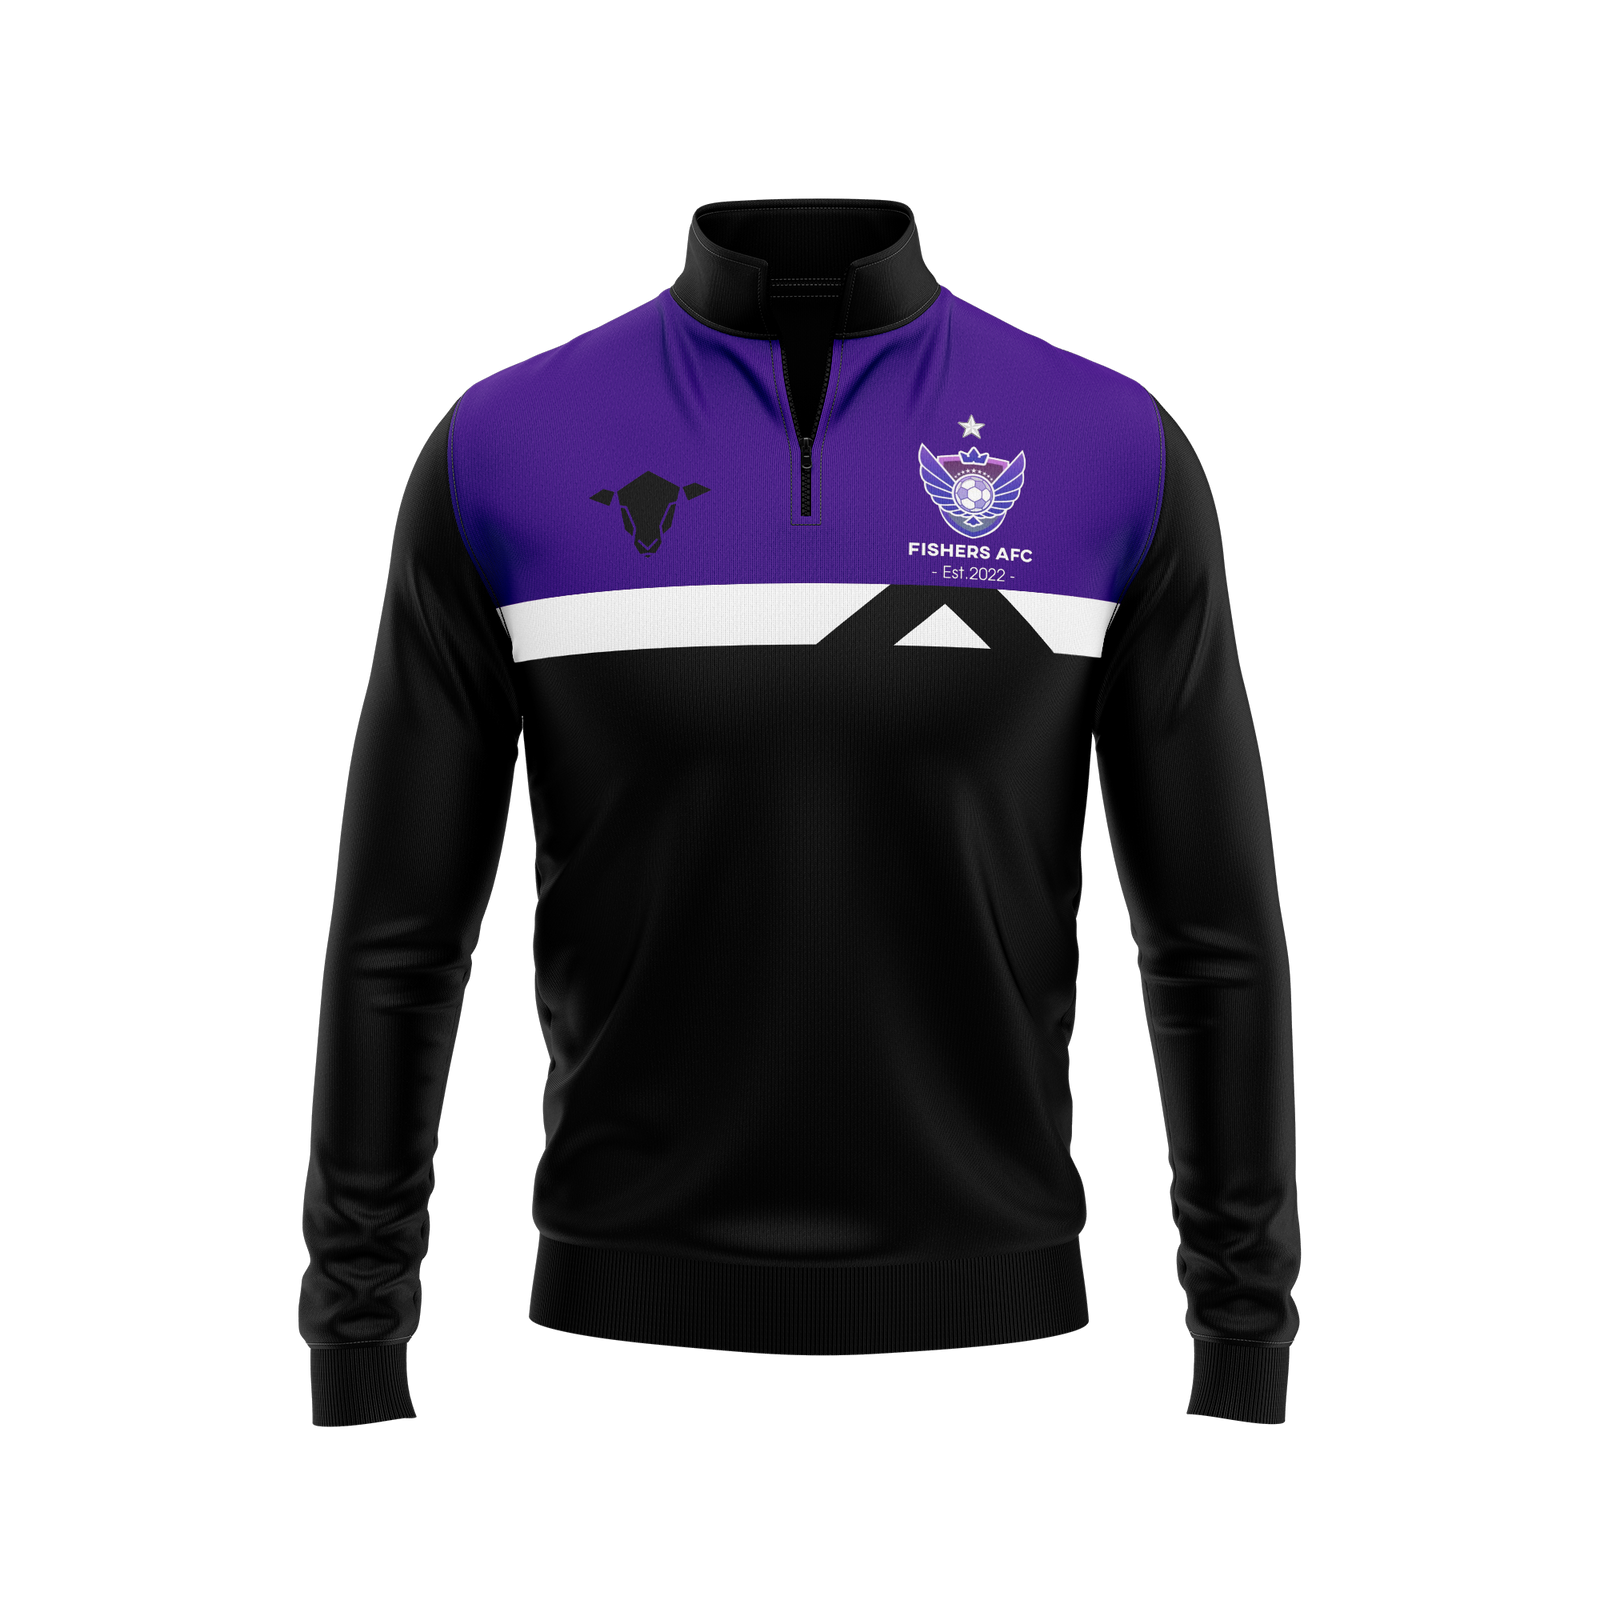 Fishers AFC Jacket - Adults